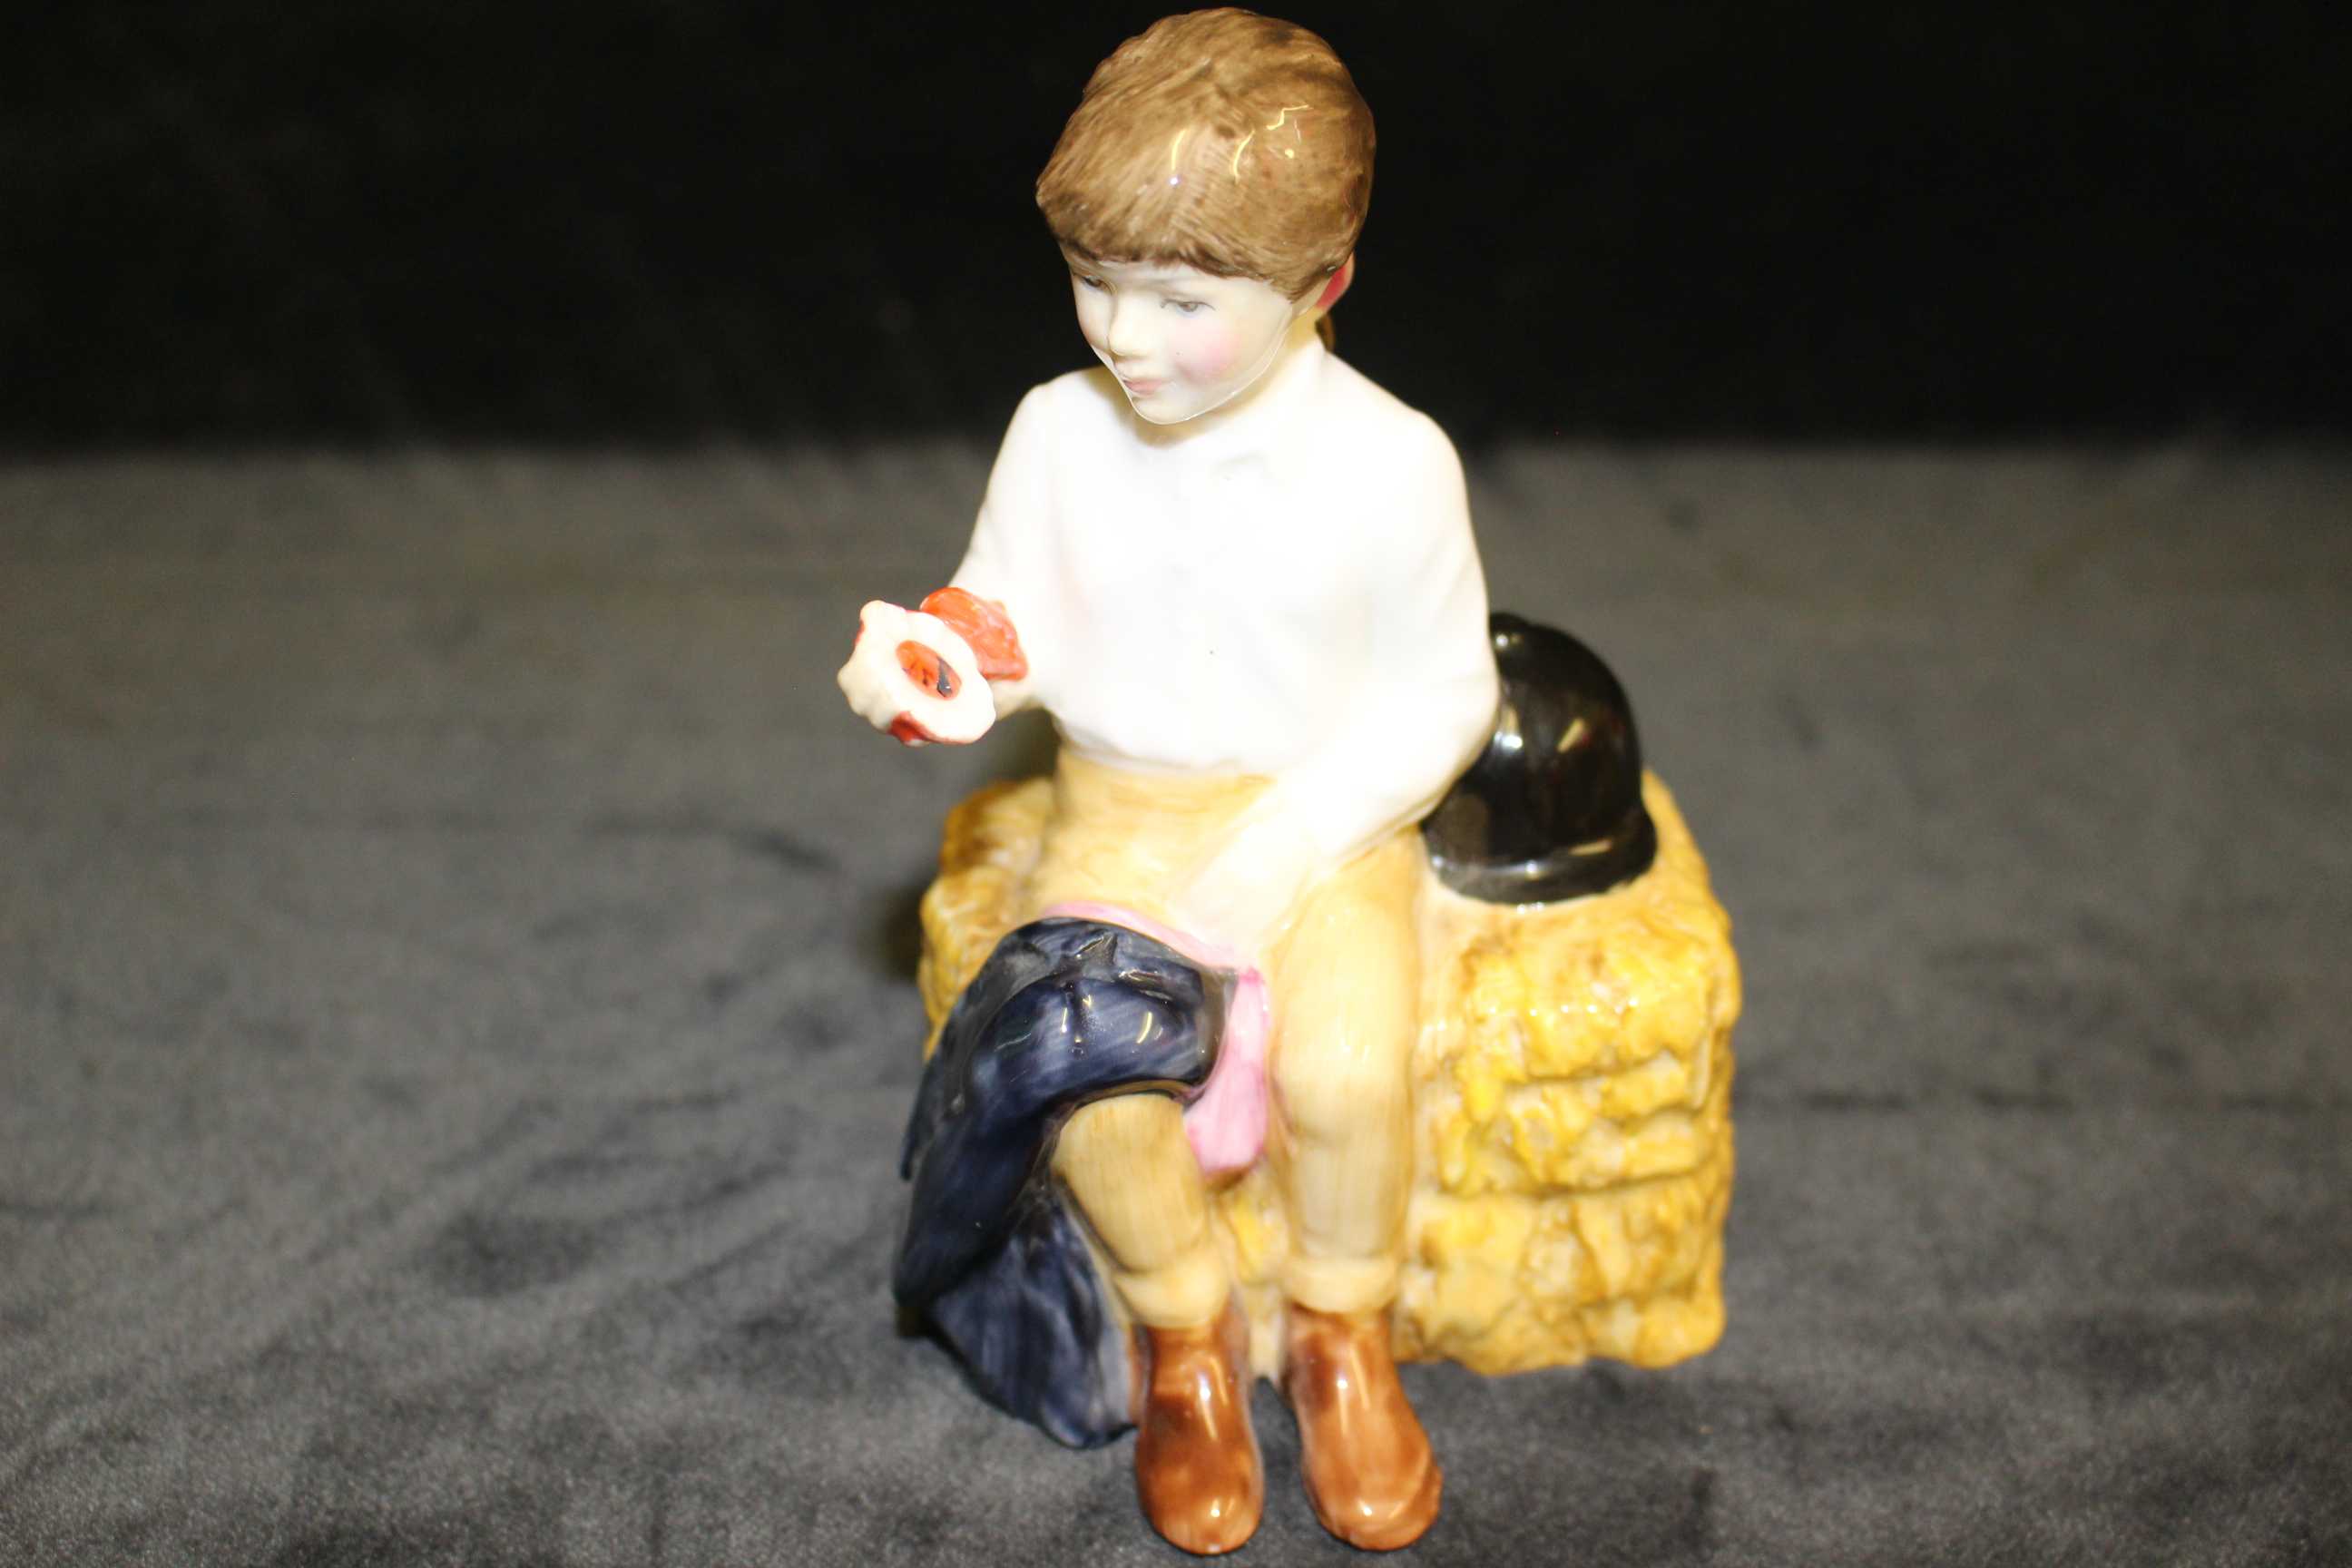 A Royal Doulton figure "Holly" HN 3647, "Winter's Day" HN 3769, "First Prize" HN 2911, "Pearly - Image 4 of 4